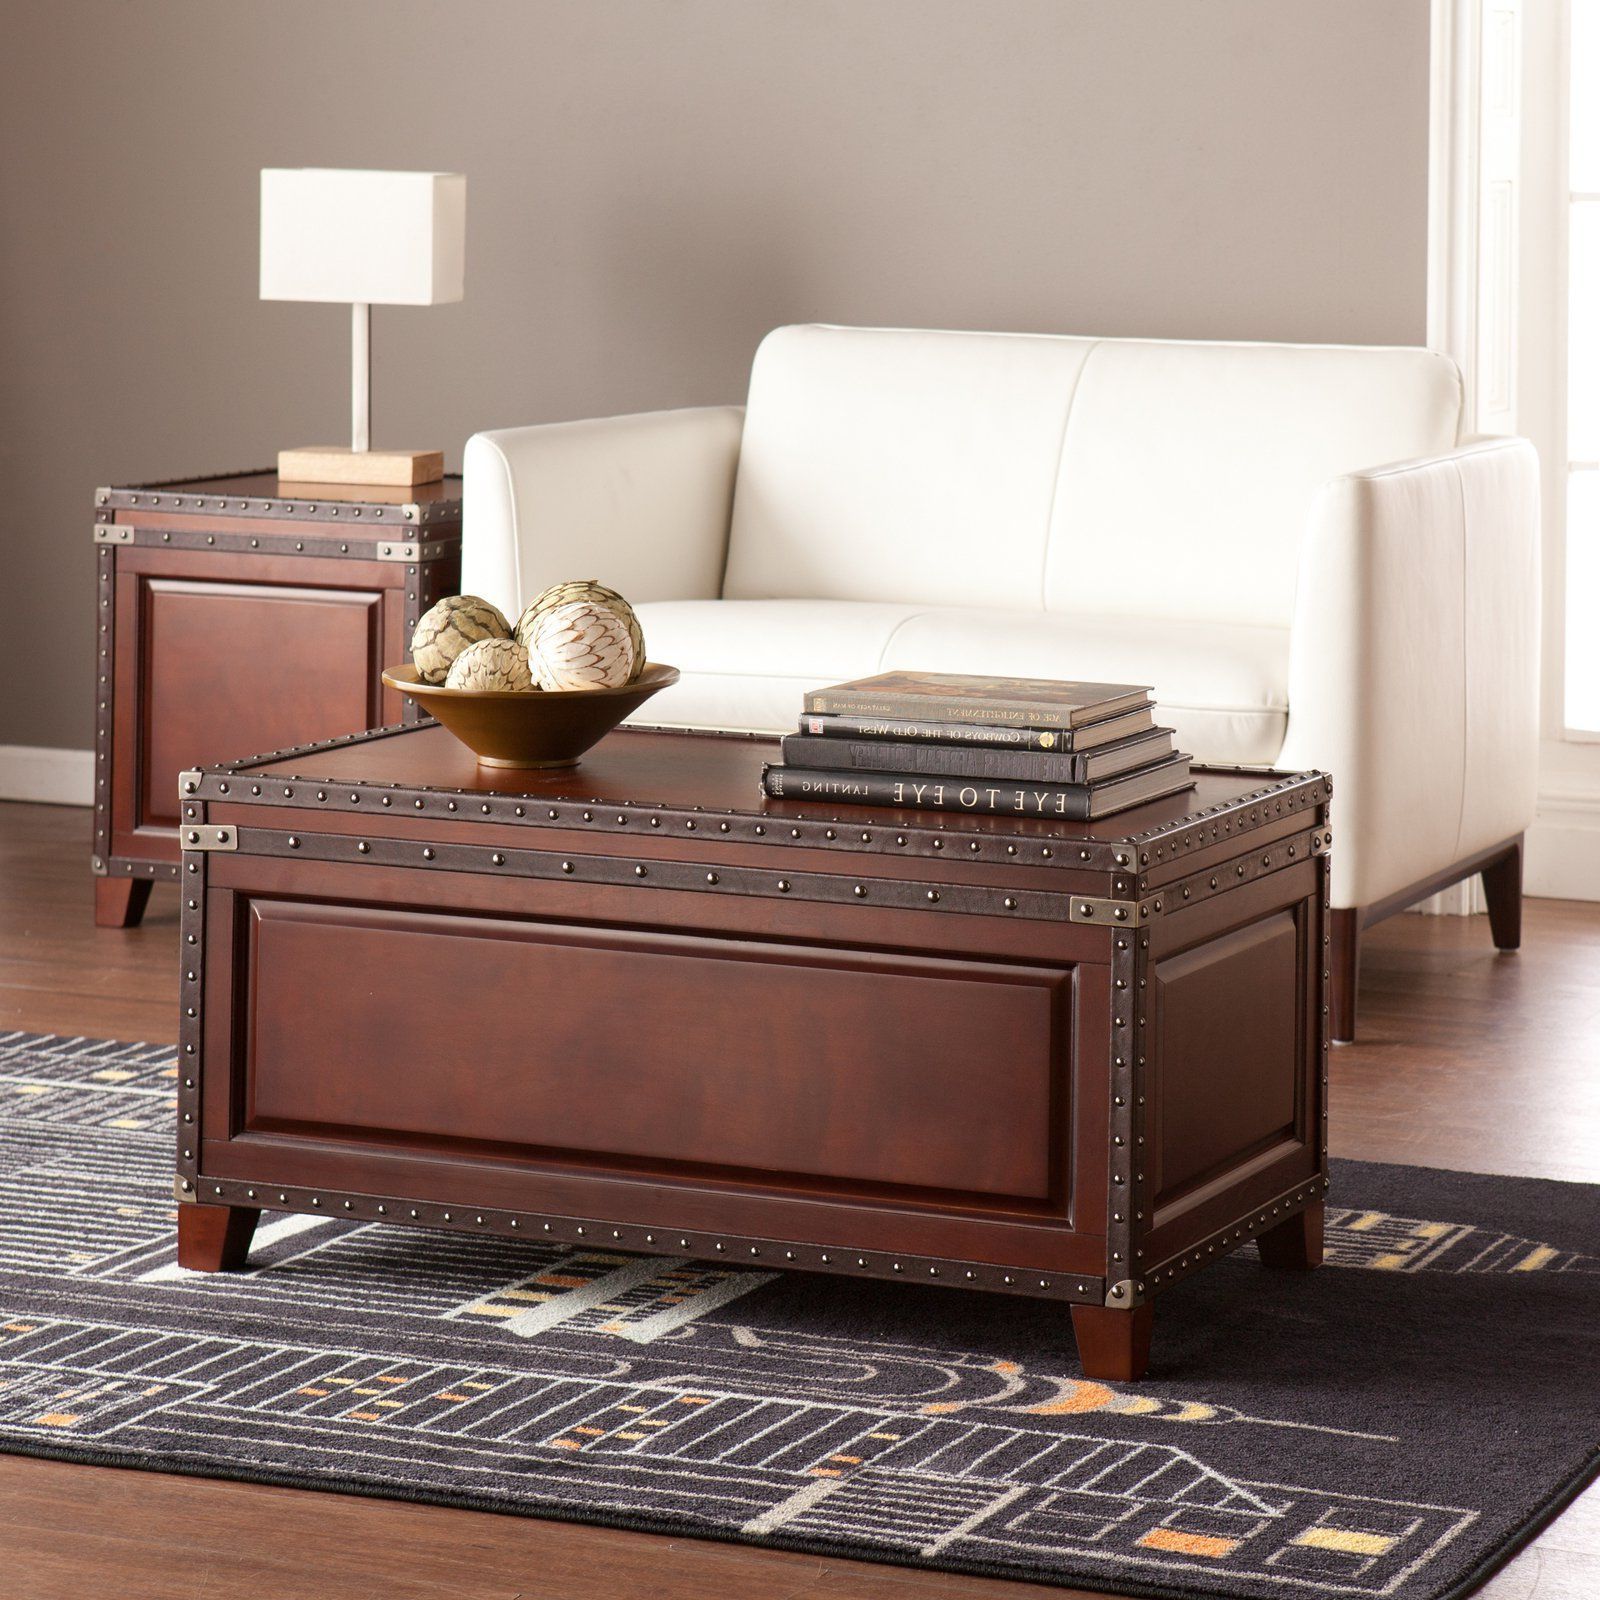 Southern Enterprises Amherst Trunk Coffee Table | From Hayneedle Intended For Southern Enterprises Larksmill Coffee Tables (Gallery 2 of 20)